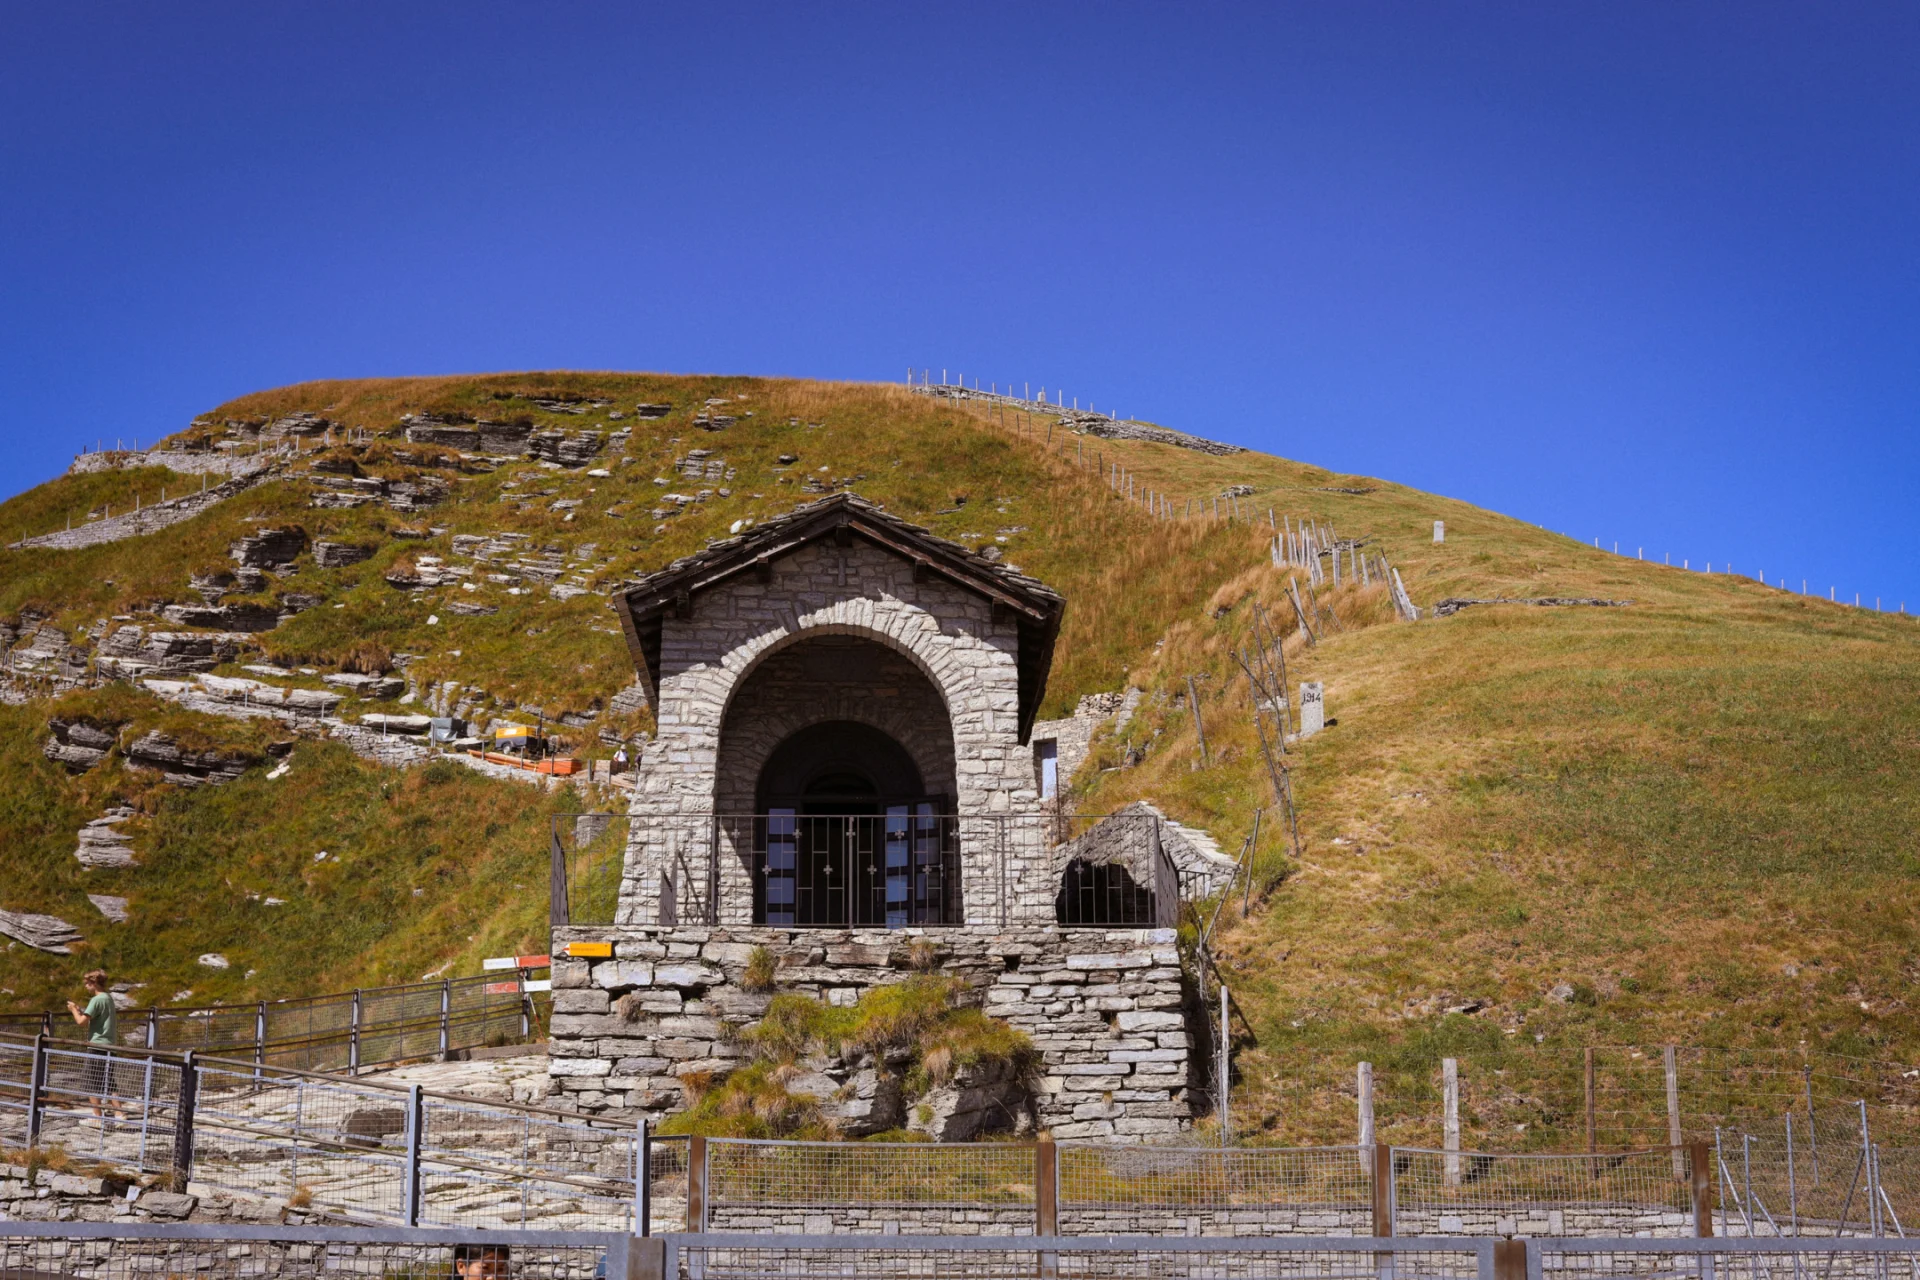 A small chapel on the side of a hill